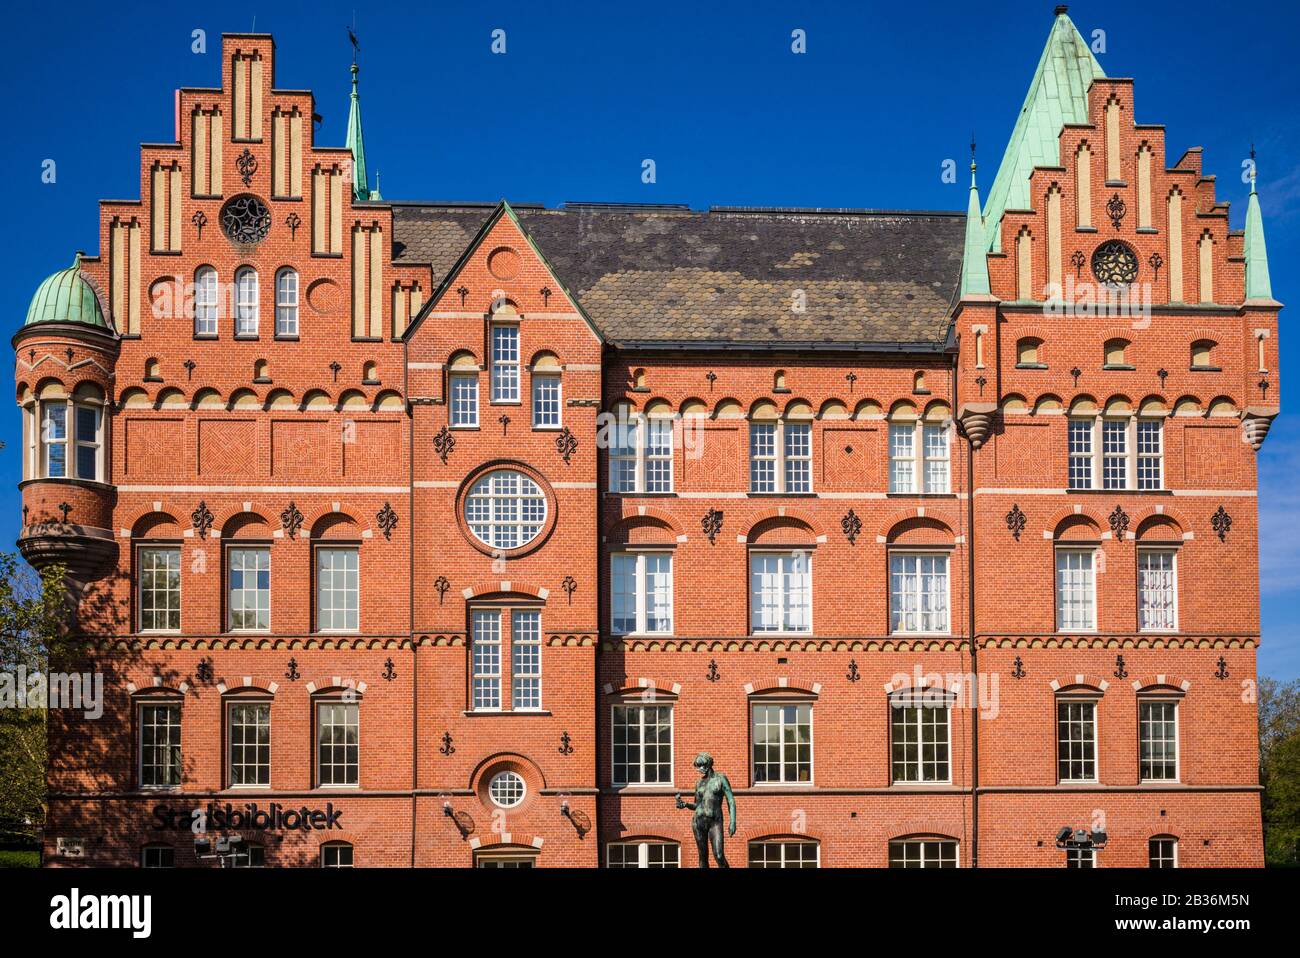 Sweden, Scania, Malmo, City Library, old building exterior Stock Photo